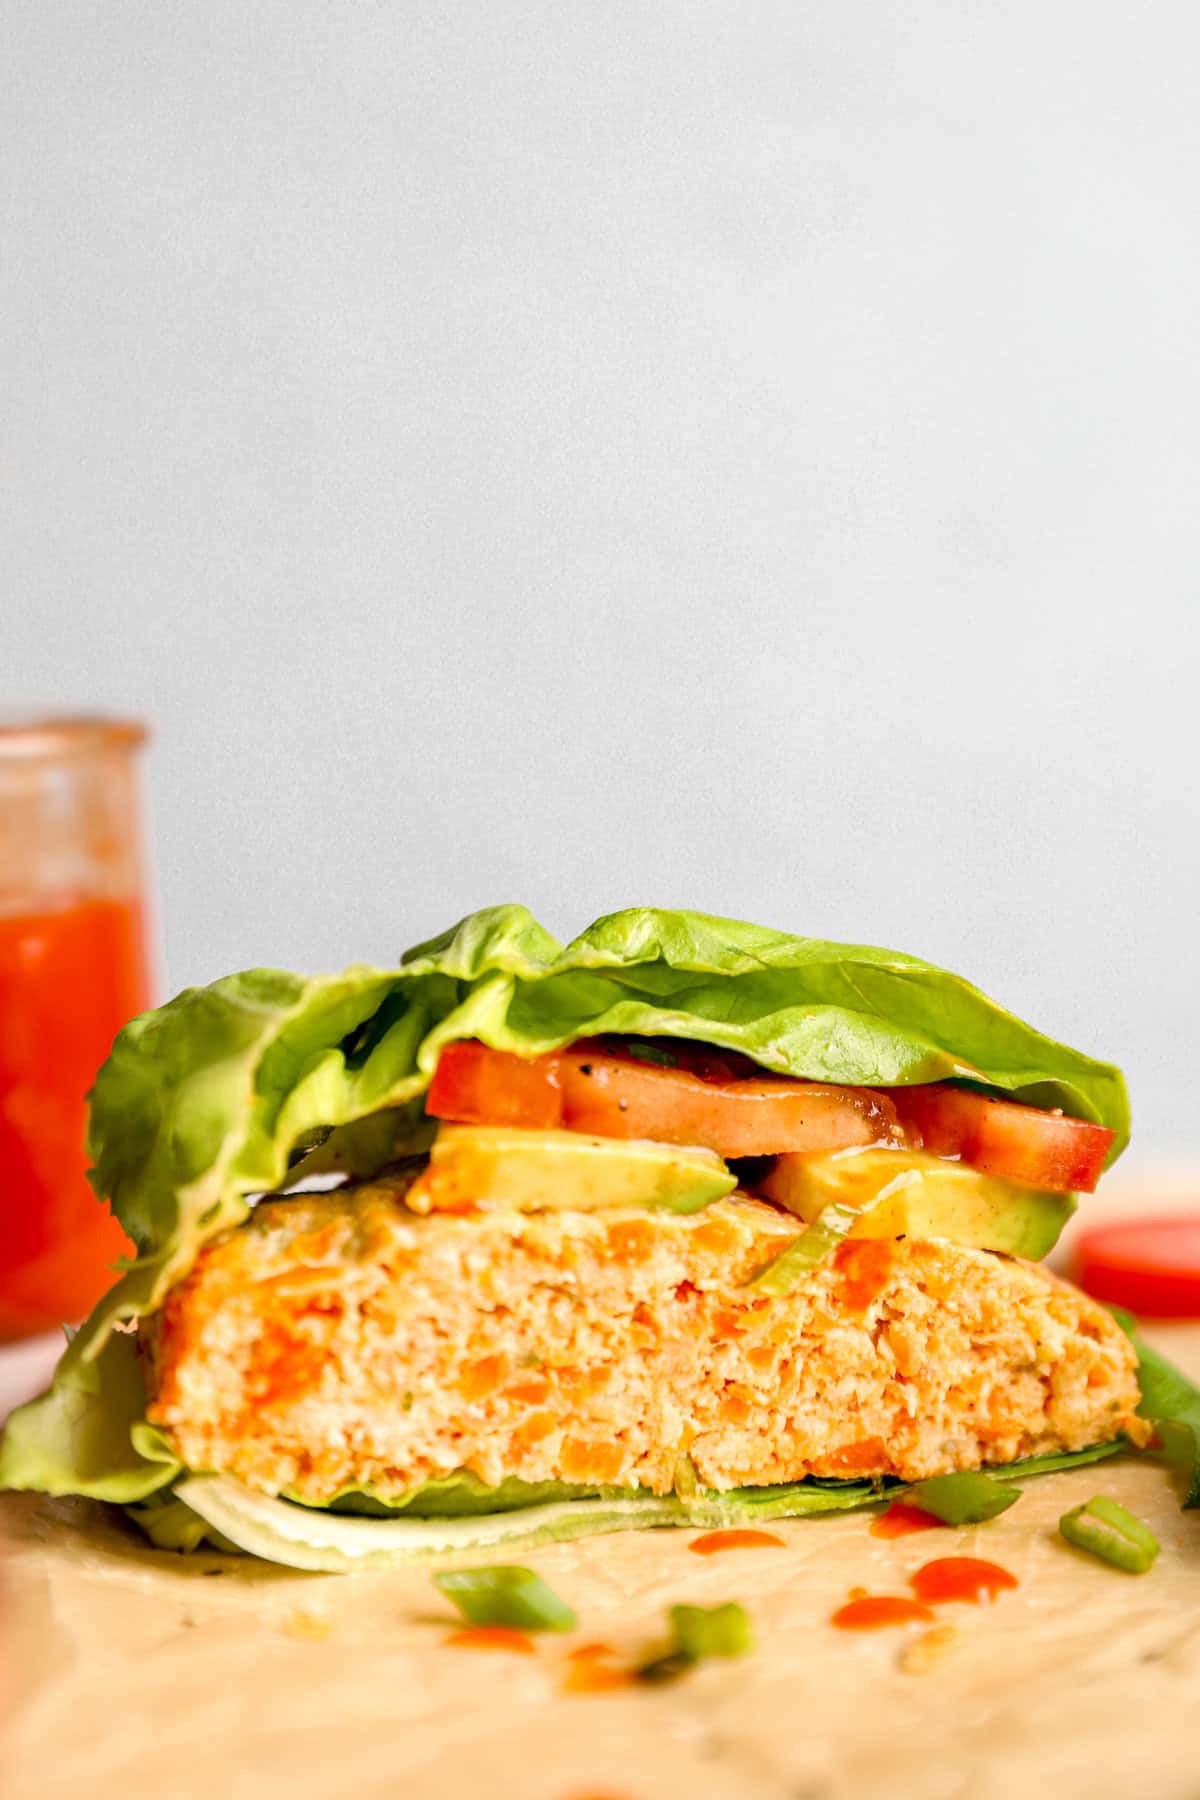 side view of a lettuce wrapped chicken burger topped with tomato.